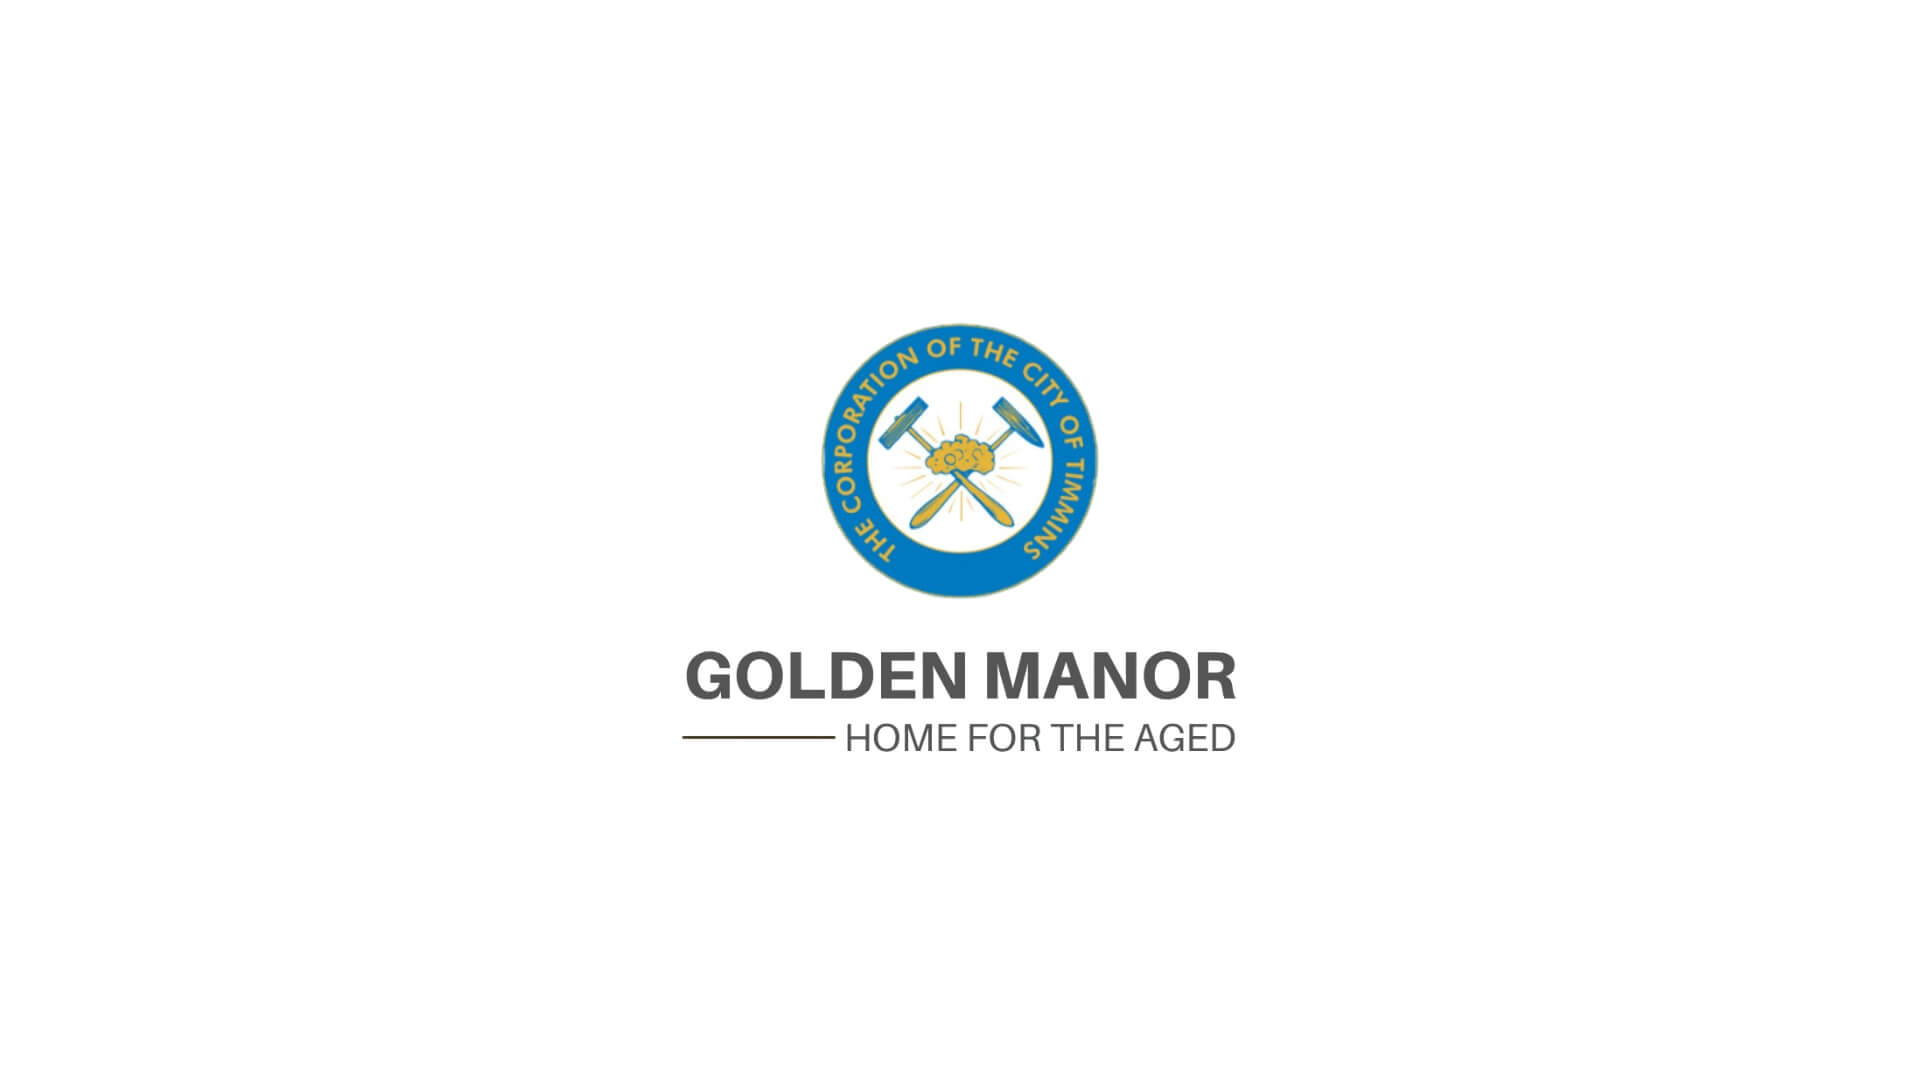 Timmins Care Logo of golden manor, home for the aged, featuring a blue and yellow emblem with a wheel and wheat, placed above the institution's name on a white background. Cochrane District Social Services Administration Board